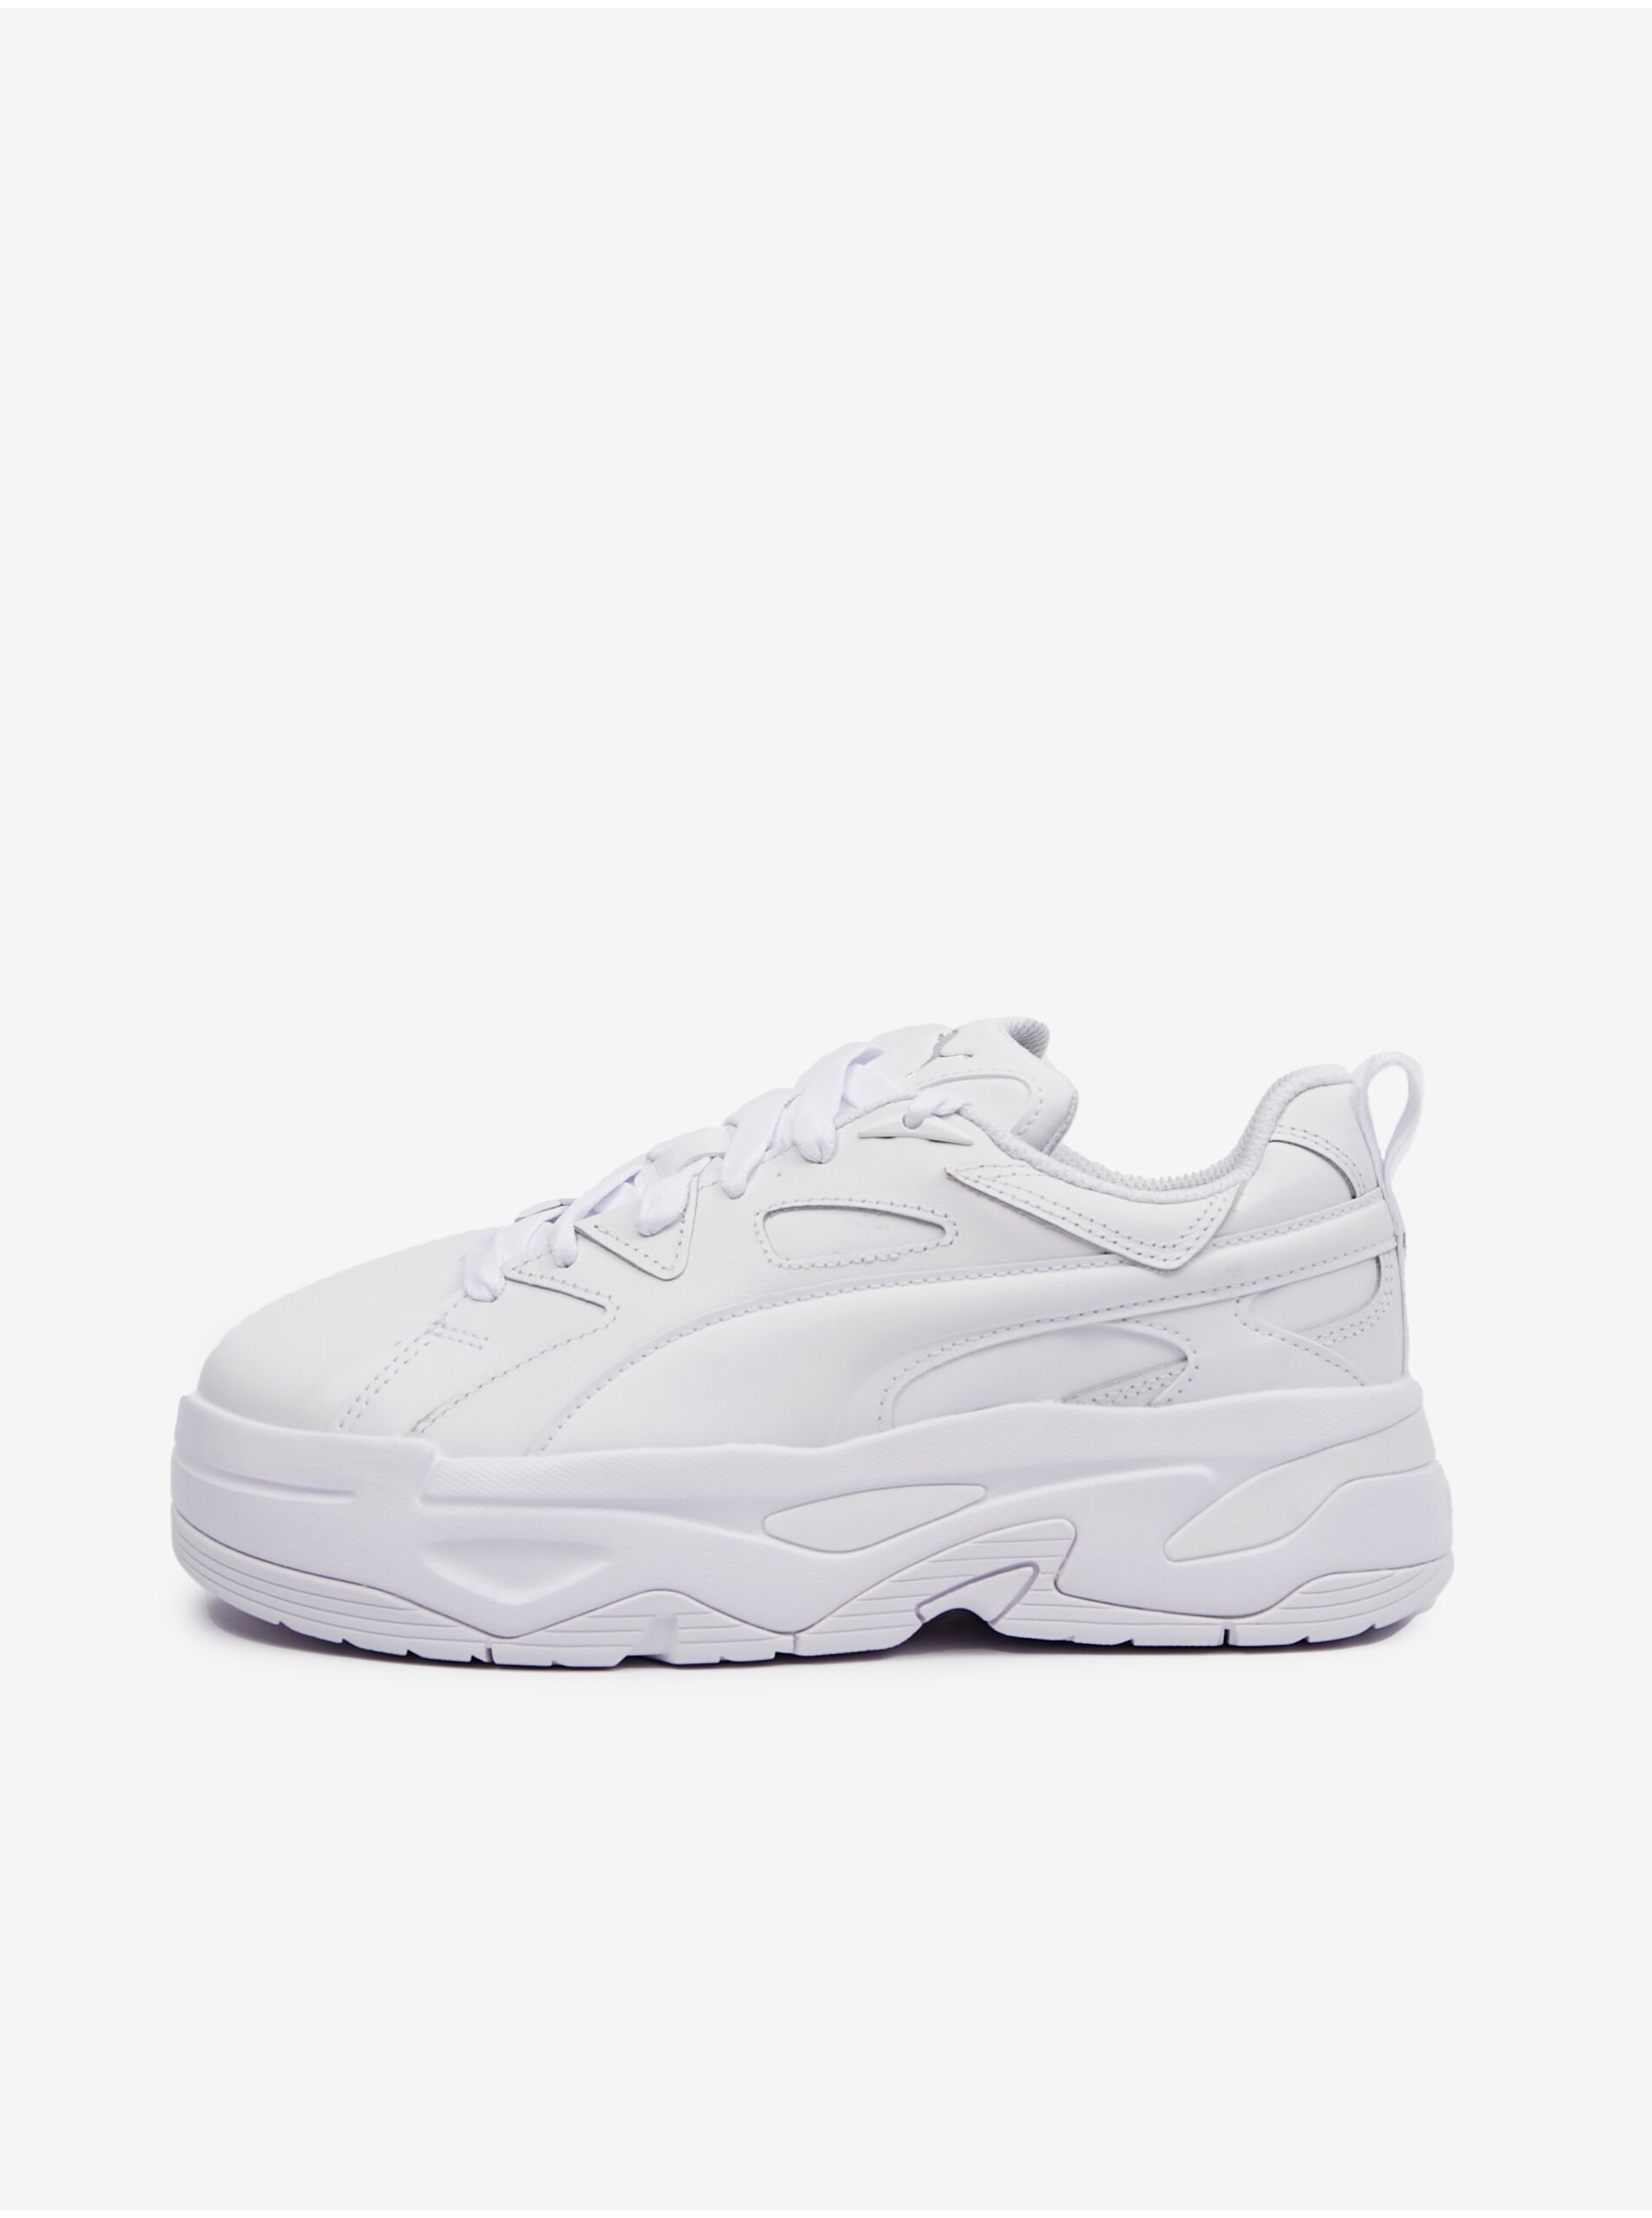 White women's sneakers with leather details Puma BLSTR Dresscode Wns - Women